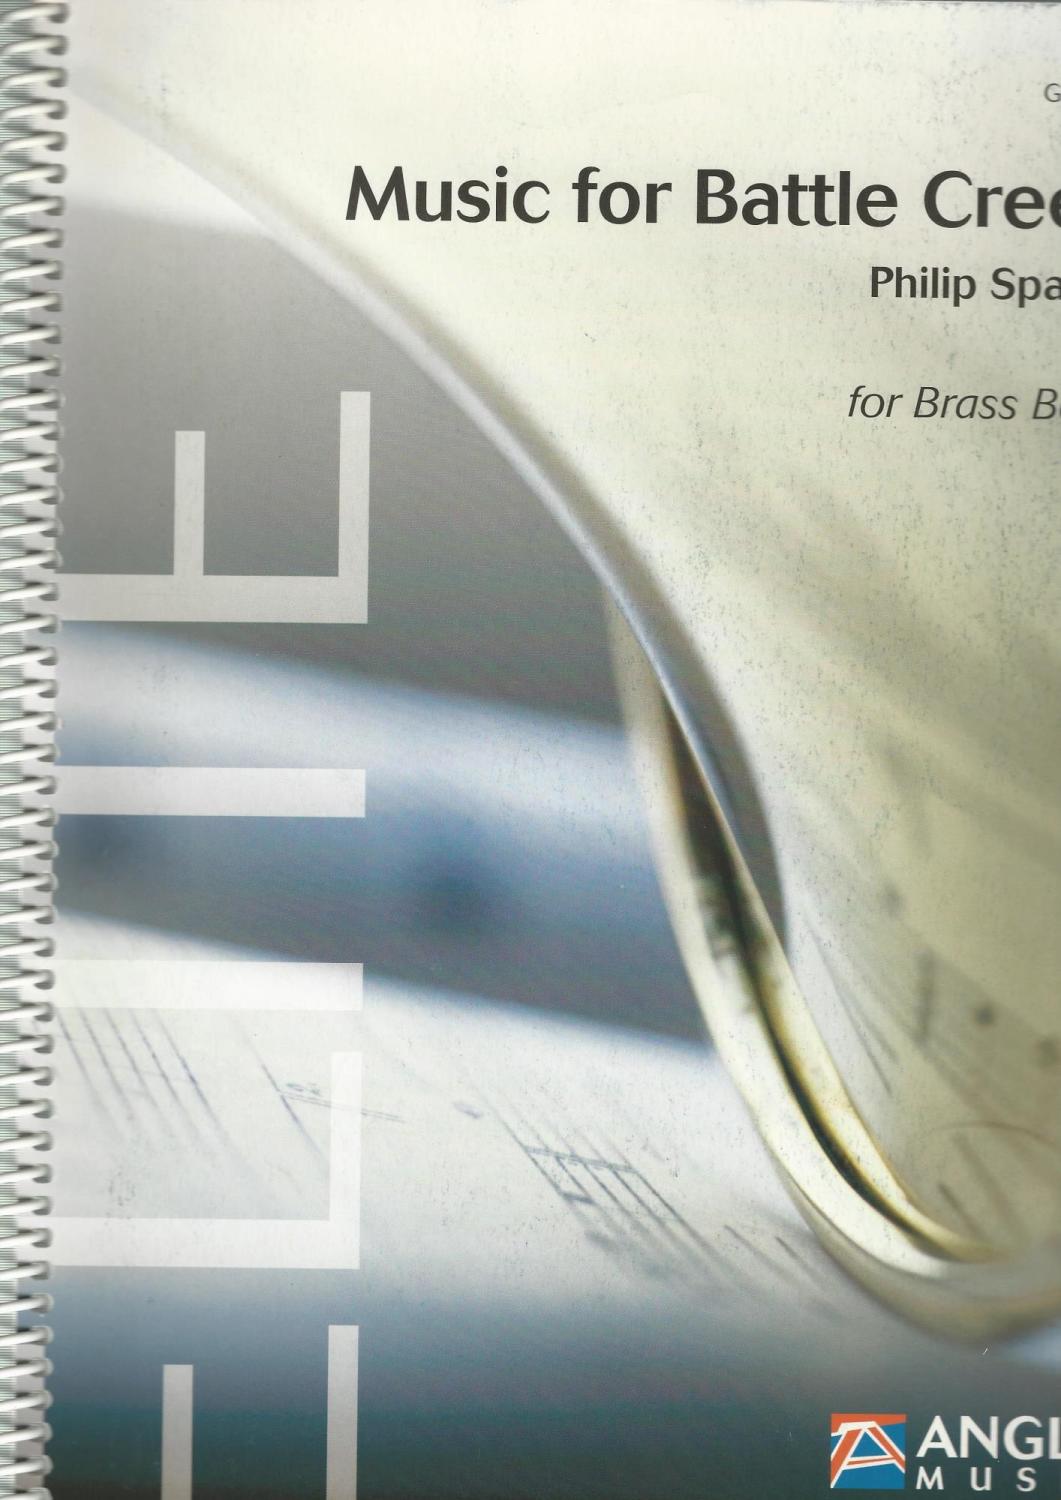 Music for Battle Creek for Brass Band (Score Only) - Philip Sparke